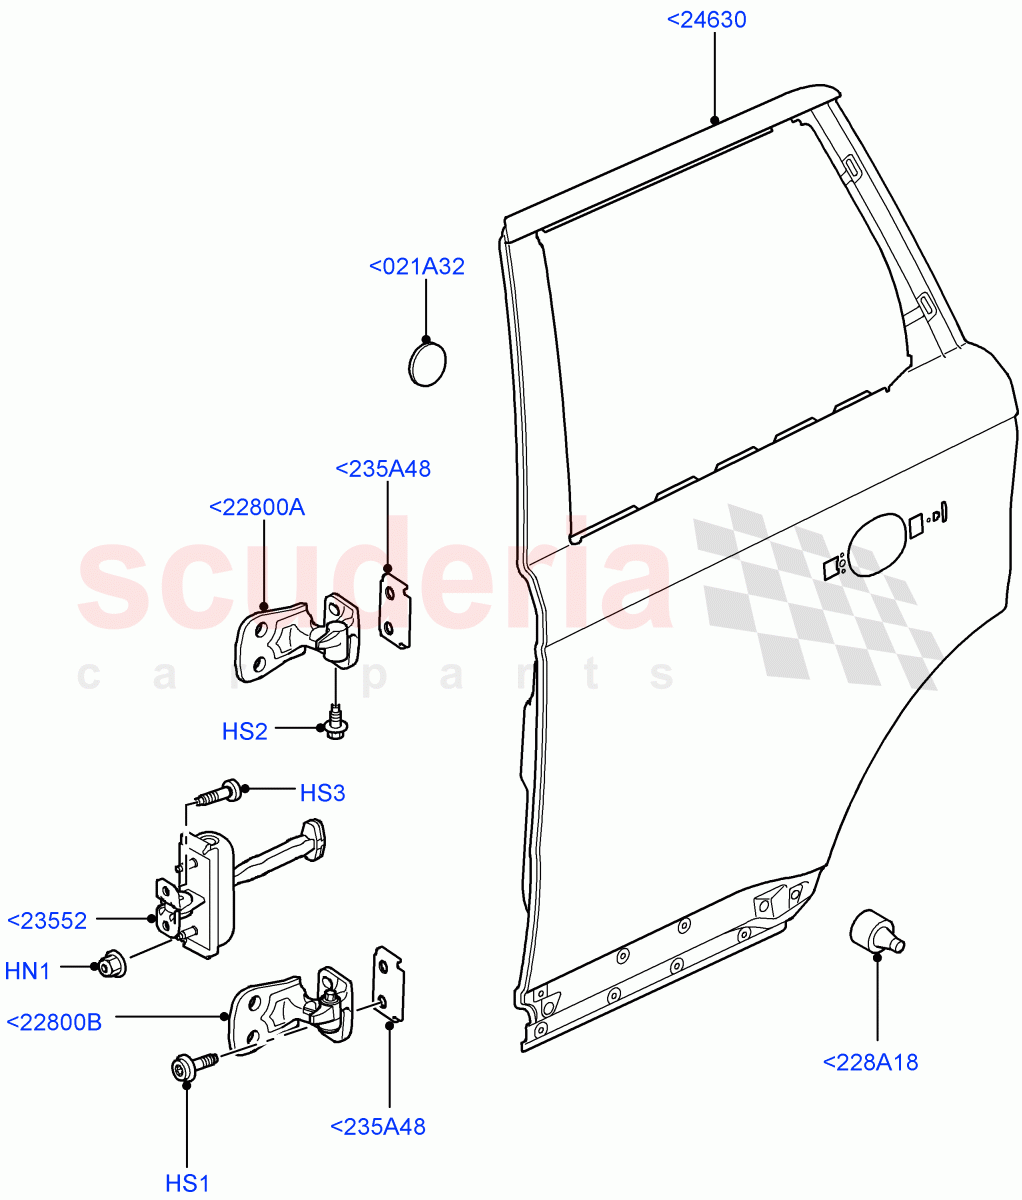 Rear Doors, Hinges & Weatherstrips(Door And Fixings)((V)FROMAA000001) of Land Rover Land Rover Range Rover Sport (2010-2013) [5.0 OHC SGDI NA V8 Petrol]